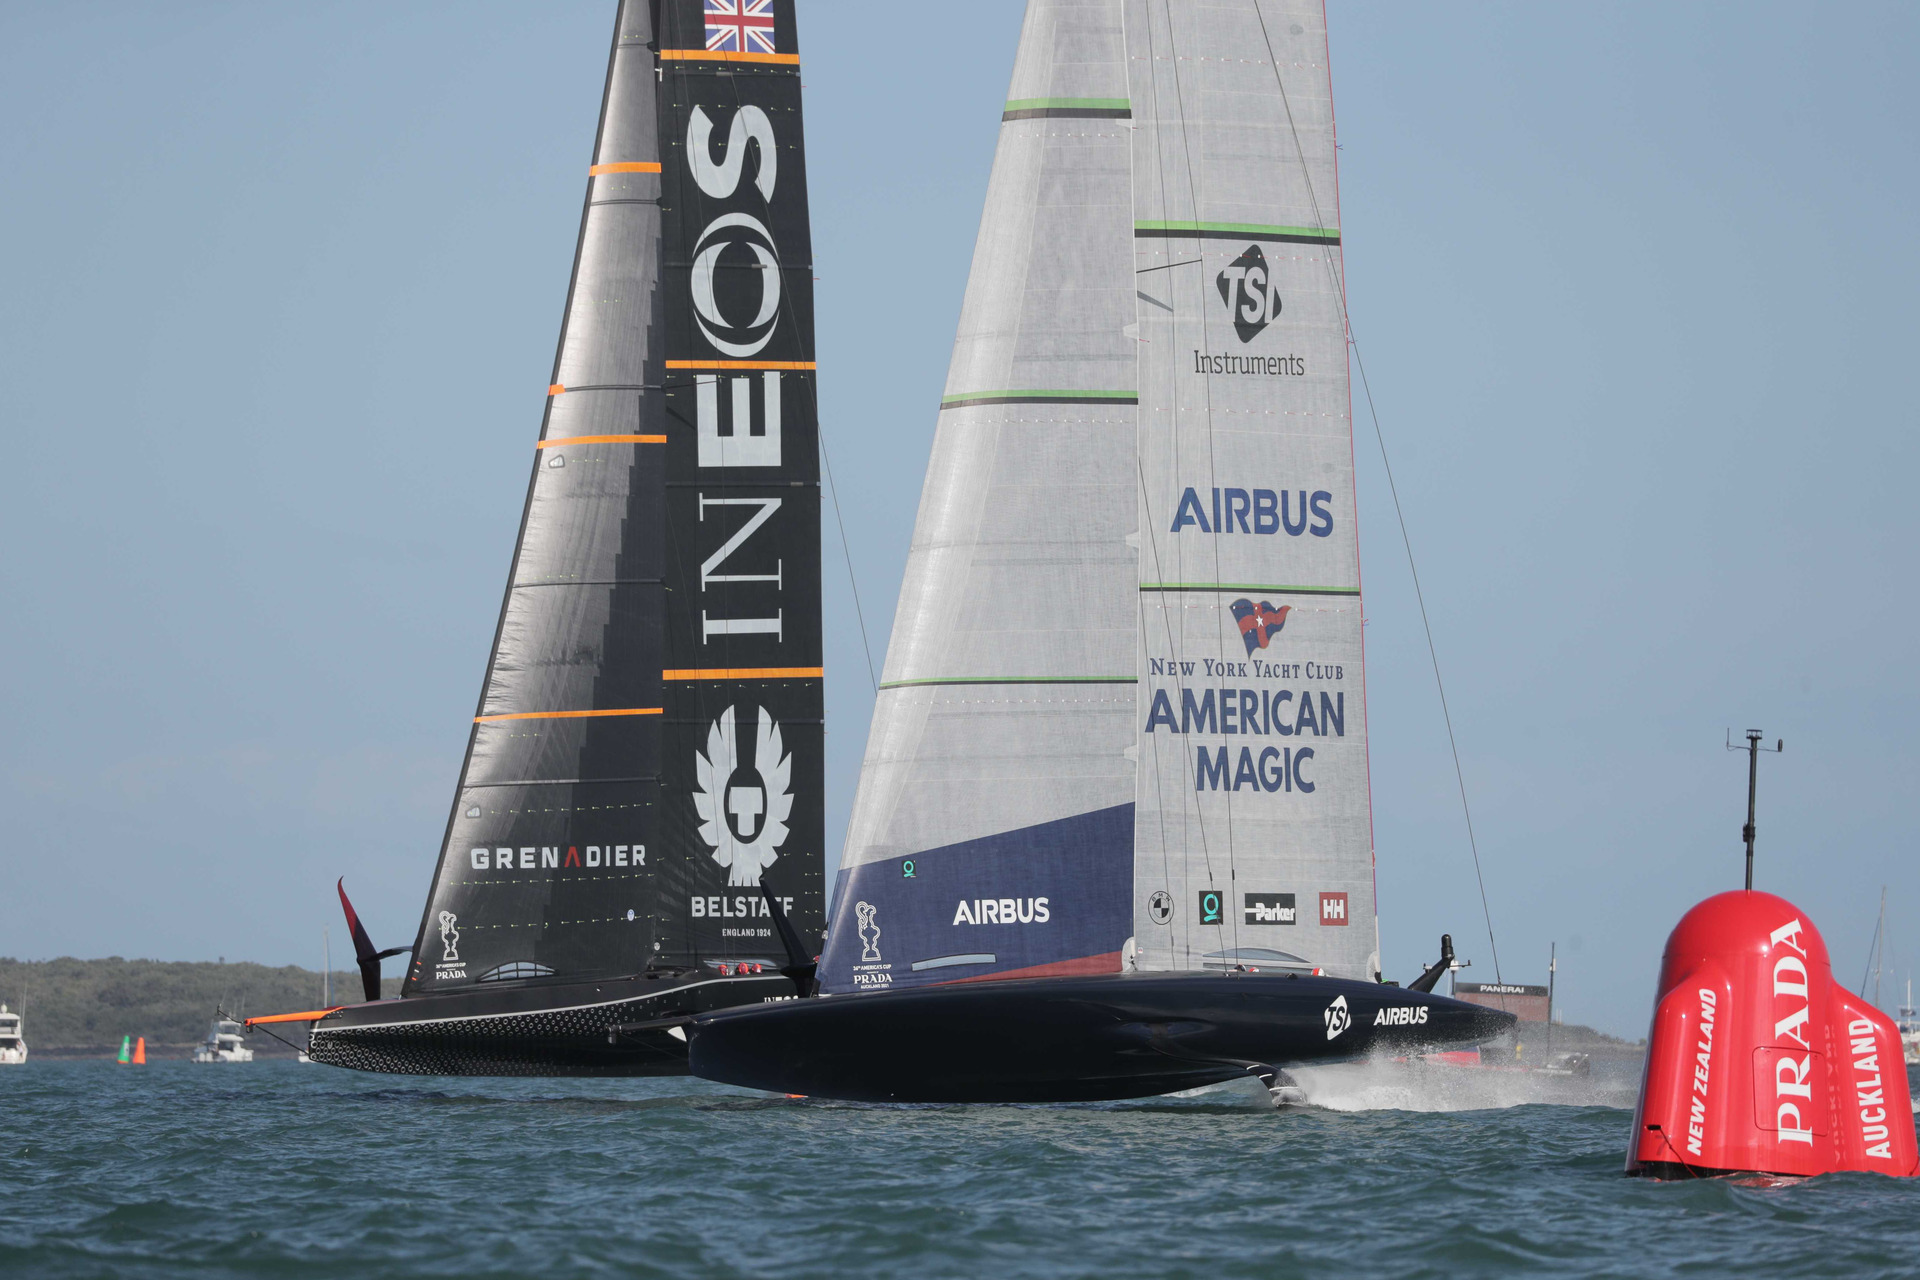 Americas Cup 2021 Prada Cup live updates - Schedule, start time, odds, live streaming and how to watch